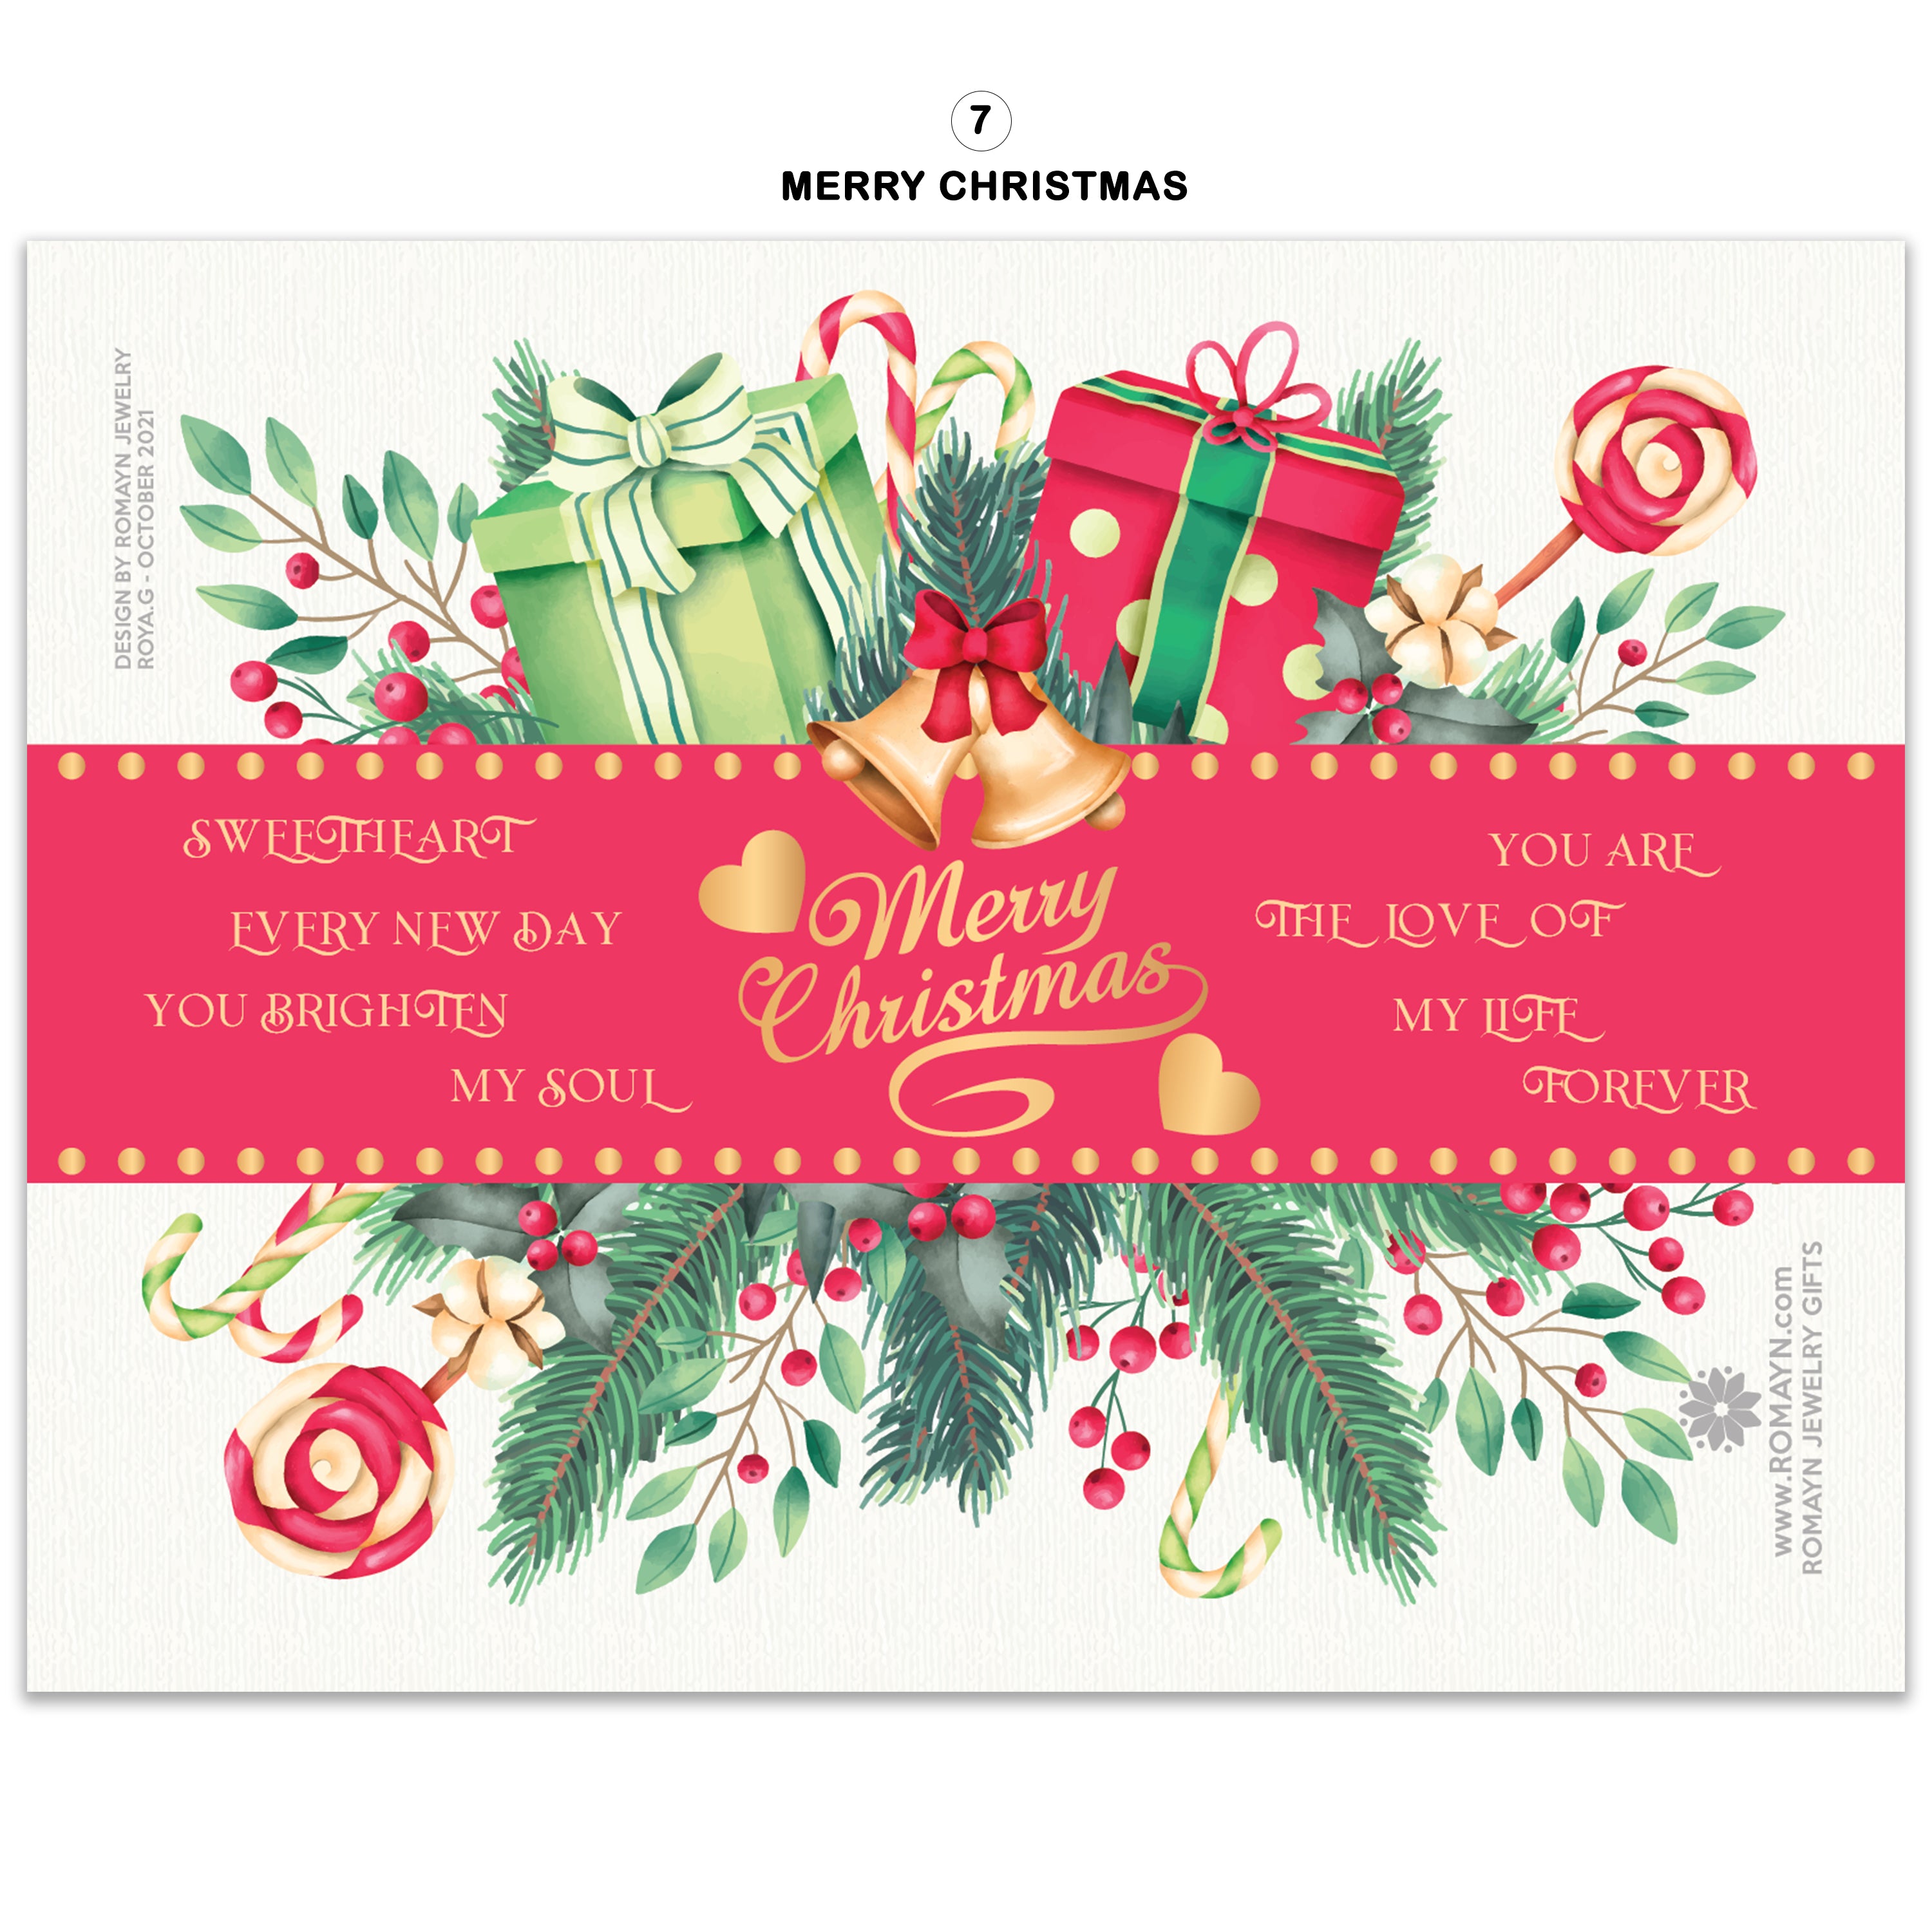 Christmas Cards, Happy Holiday Card, Happy New Year Cards